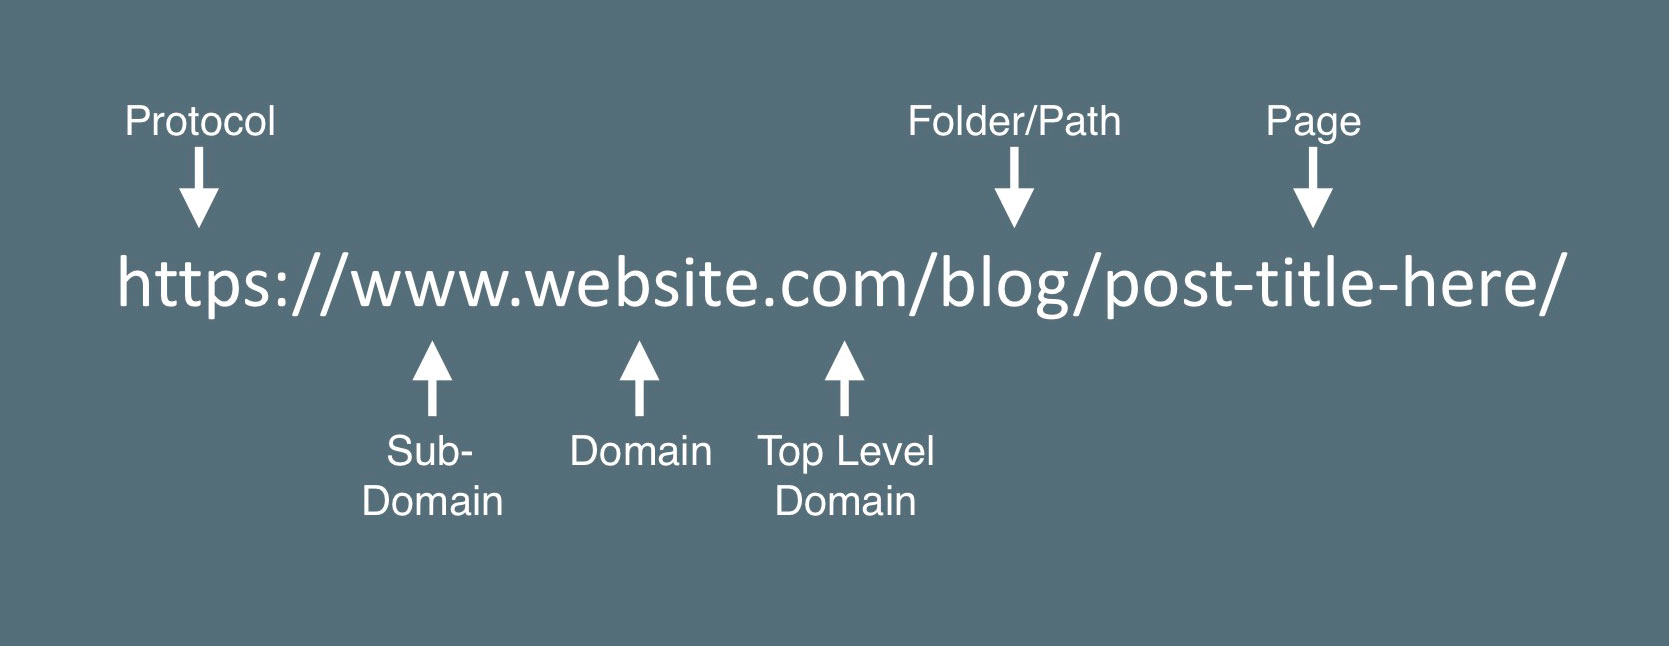 Blog url structure example